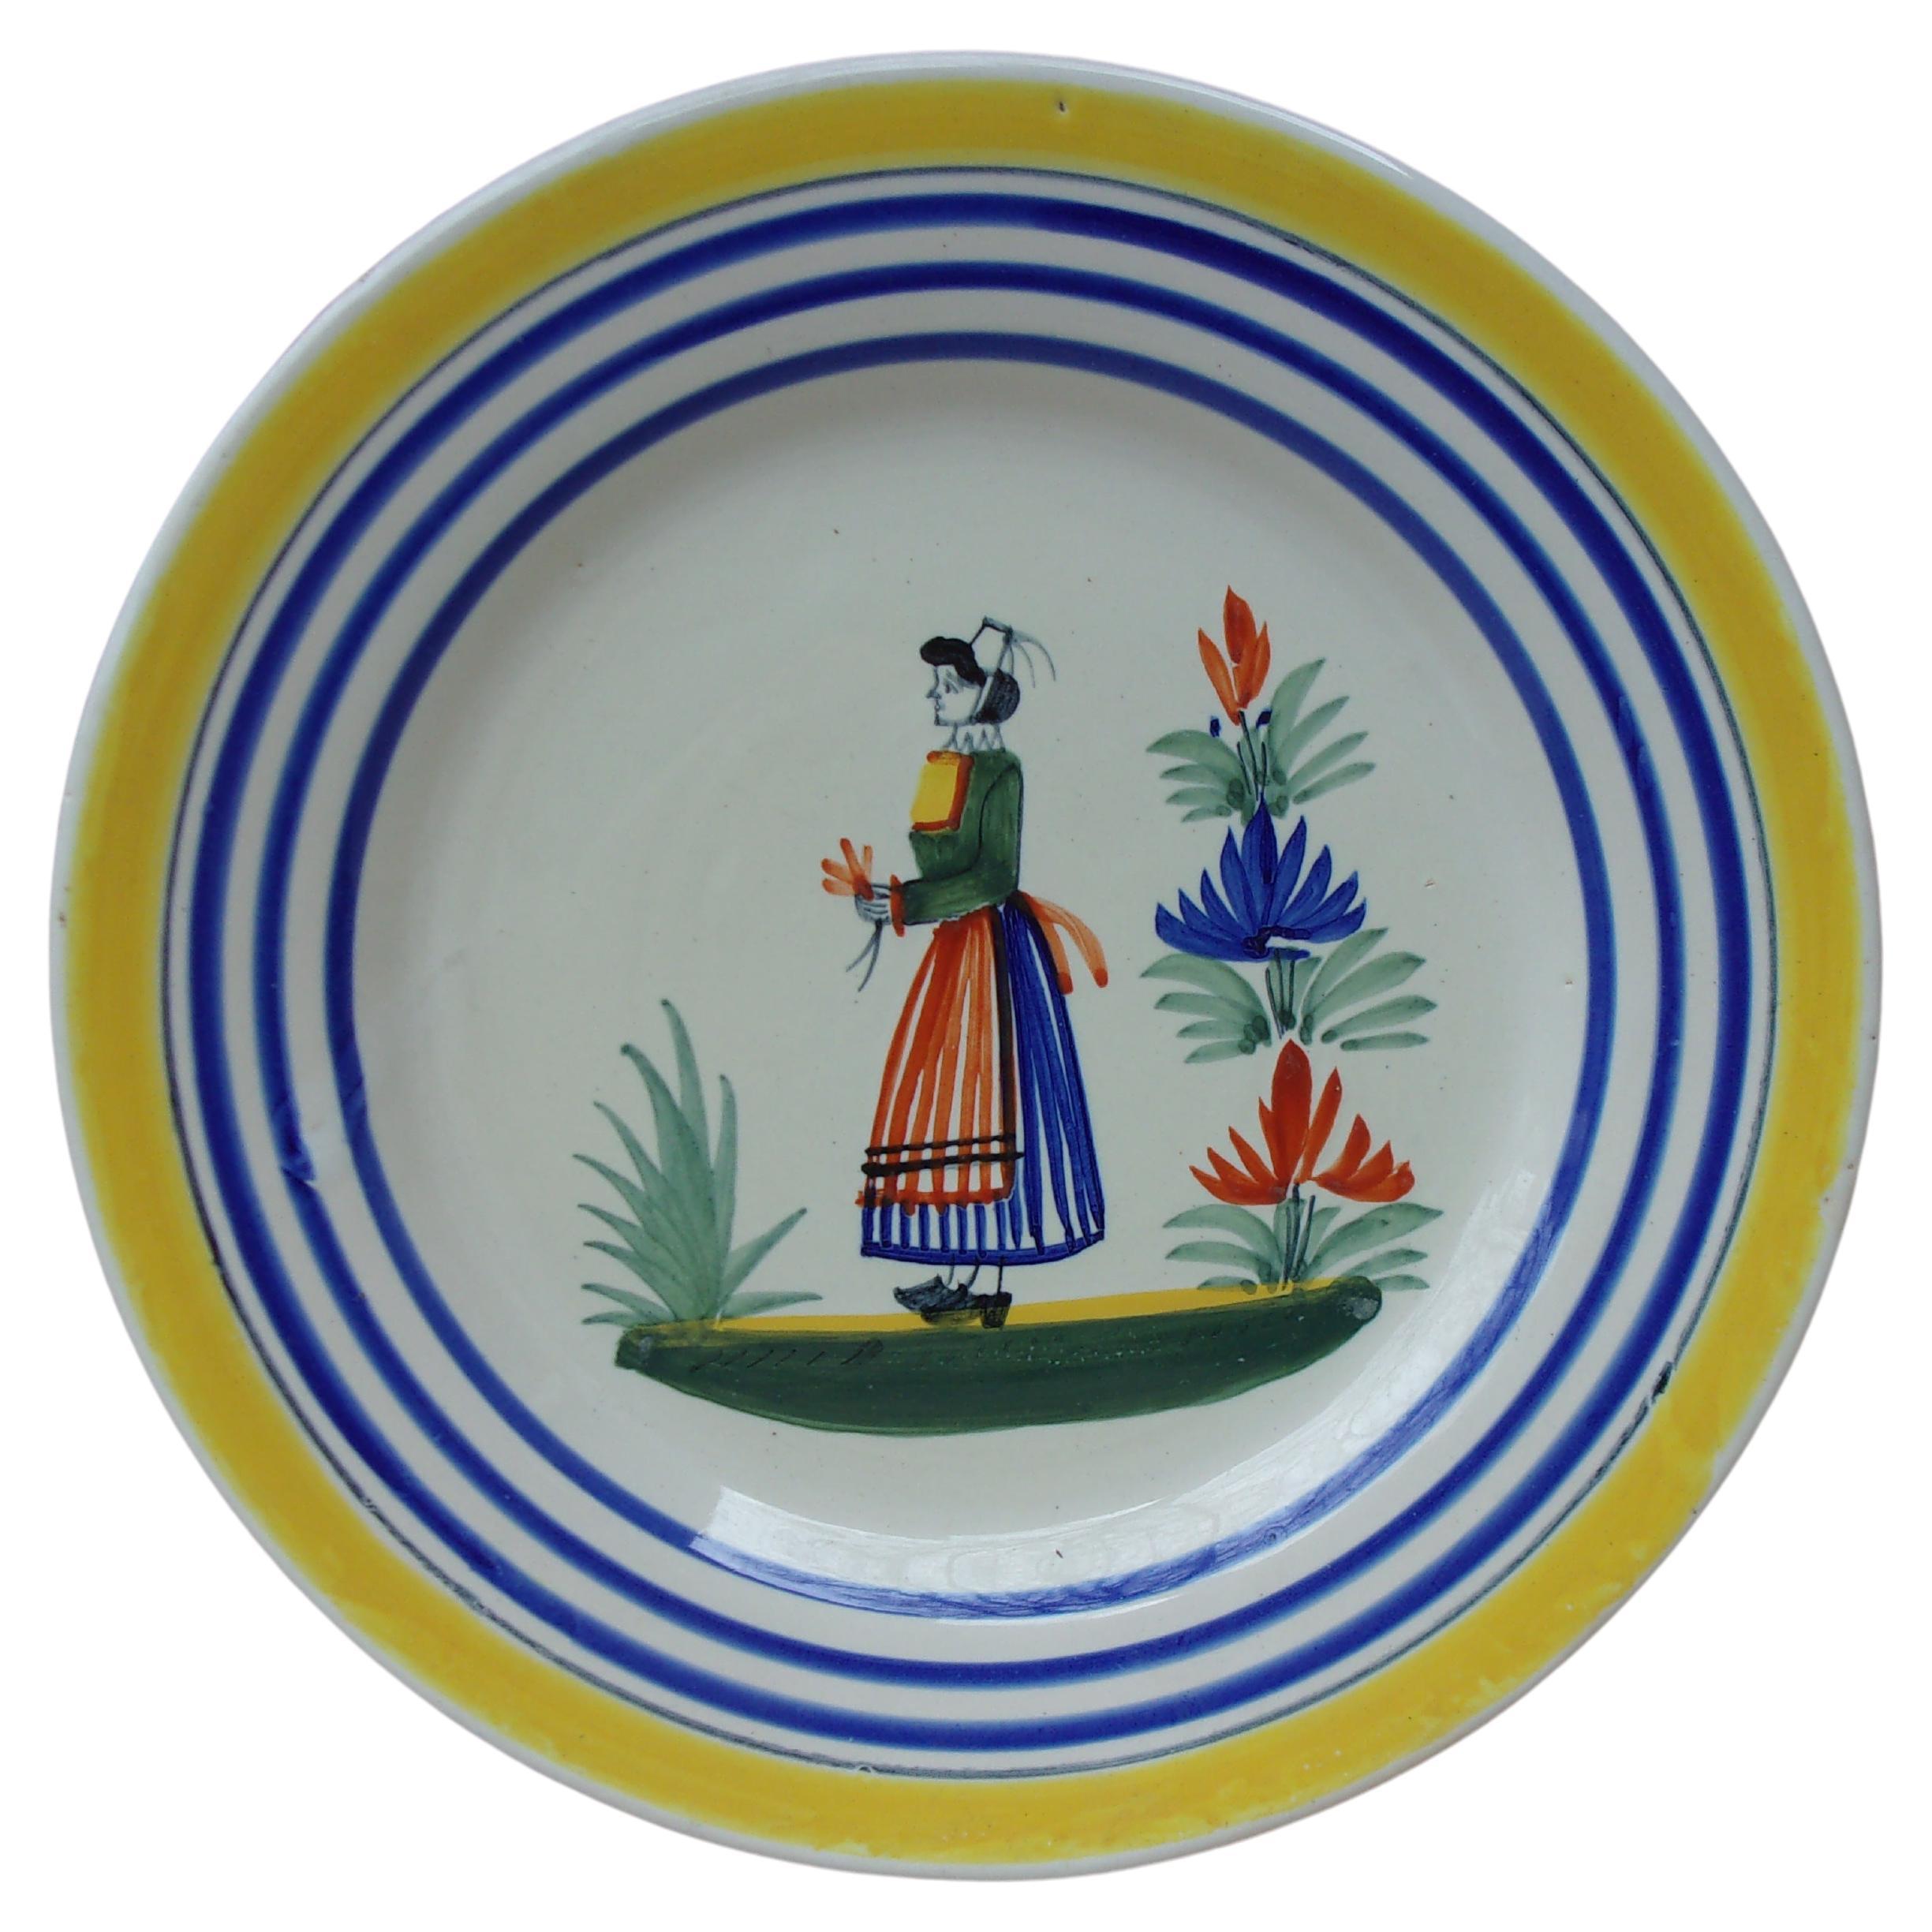 Faience Woman or Lady Center 7 1/8" Henriot Quimper Salad or Appetizer Plate 